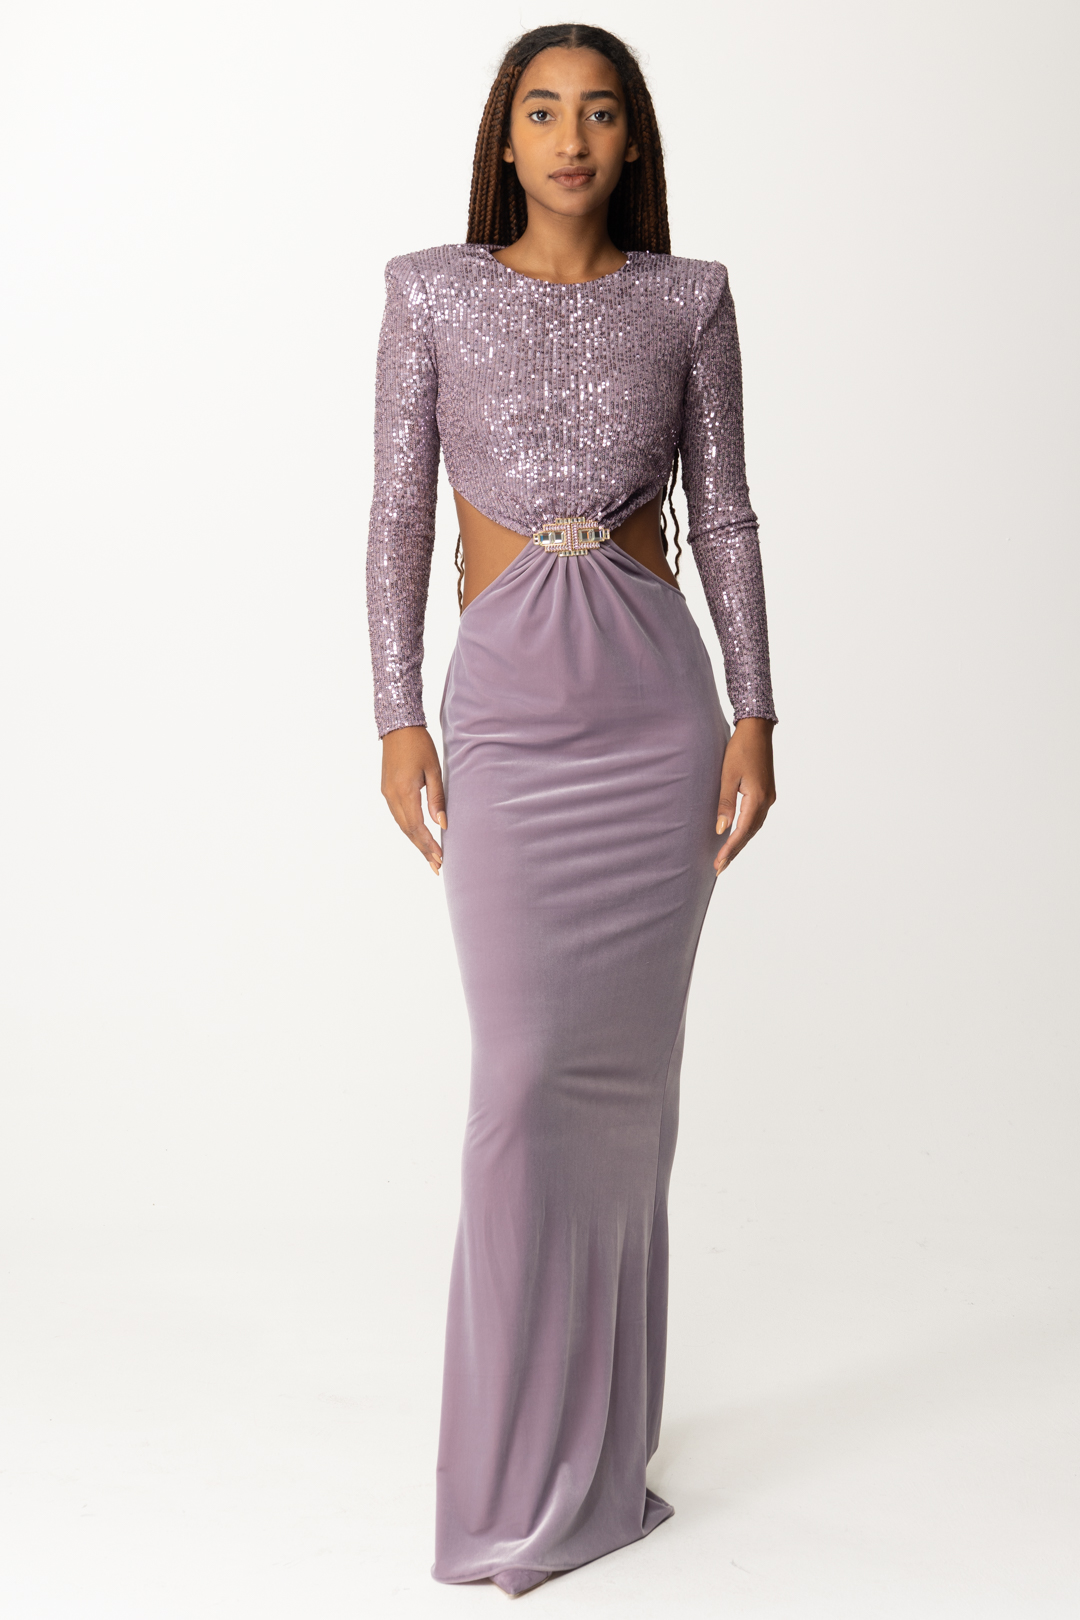 Preview: Elisabetta Franchi Red Carpet Dress with Embroidered Top and Cut-Out CANDY VIOLET